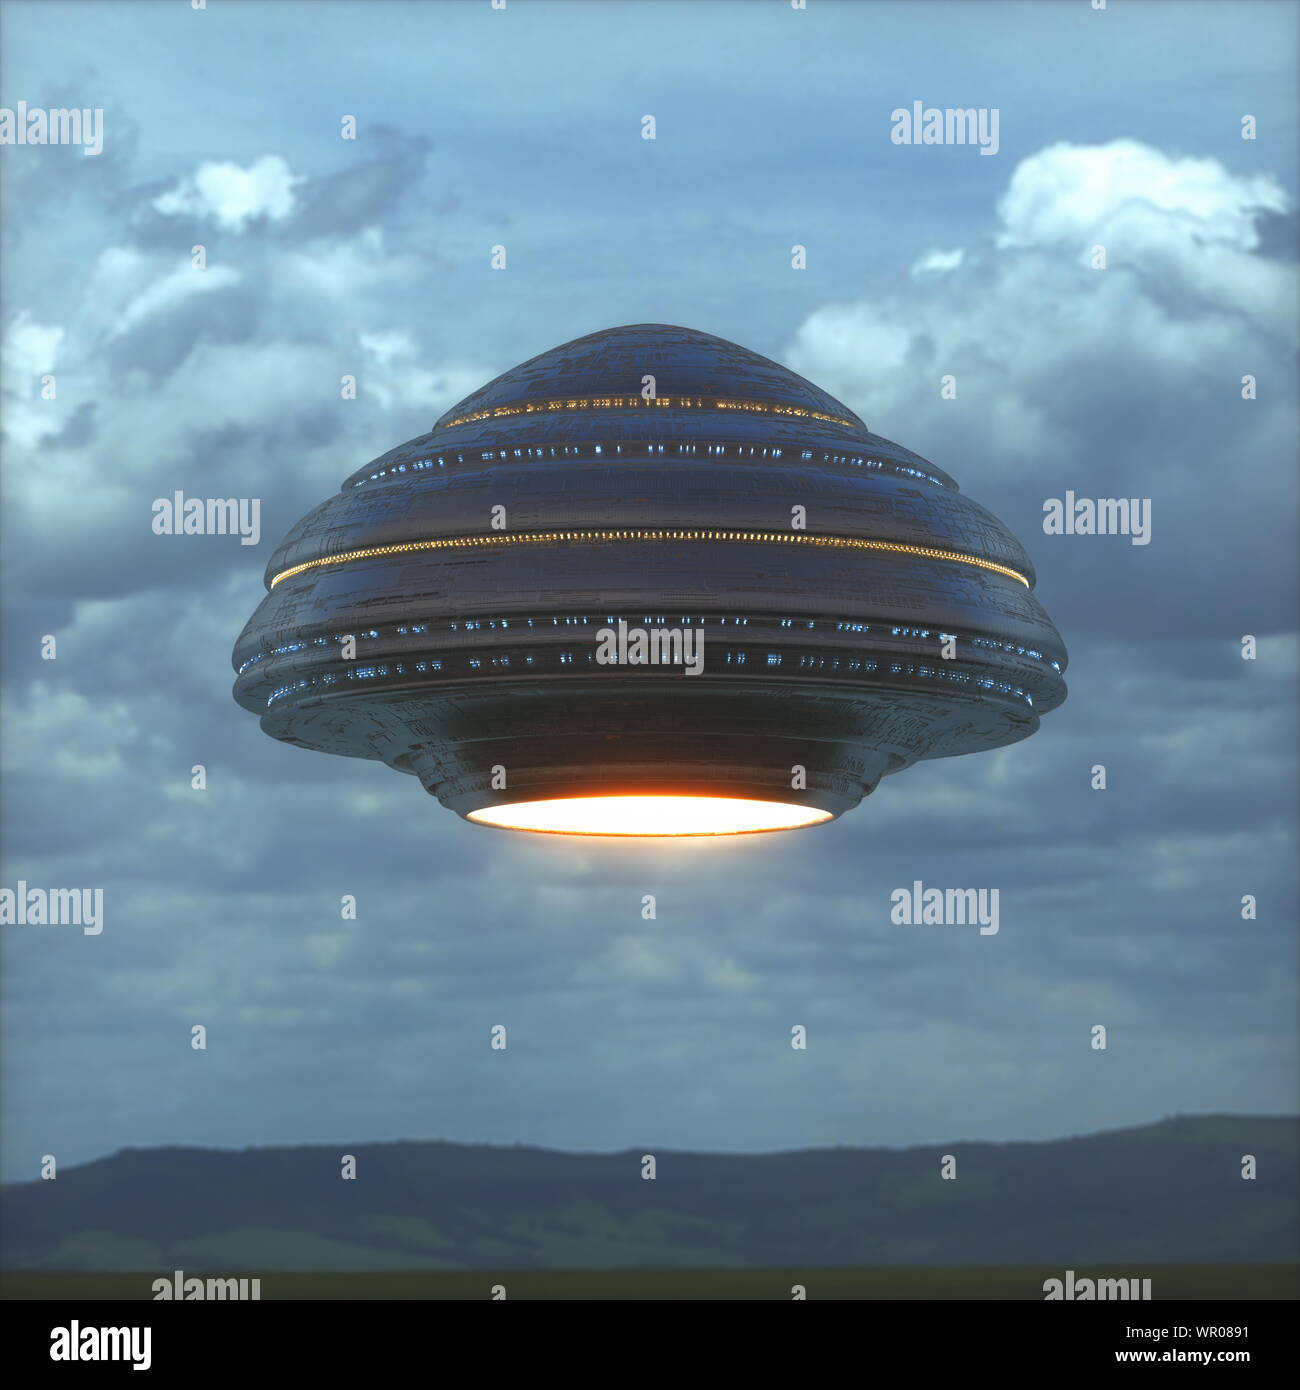 Unidentified flying object - UFO. Science Fiction image concept of ufology and life out of planet Earth. 3D illustration. Stock Photo